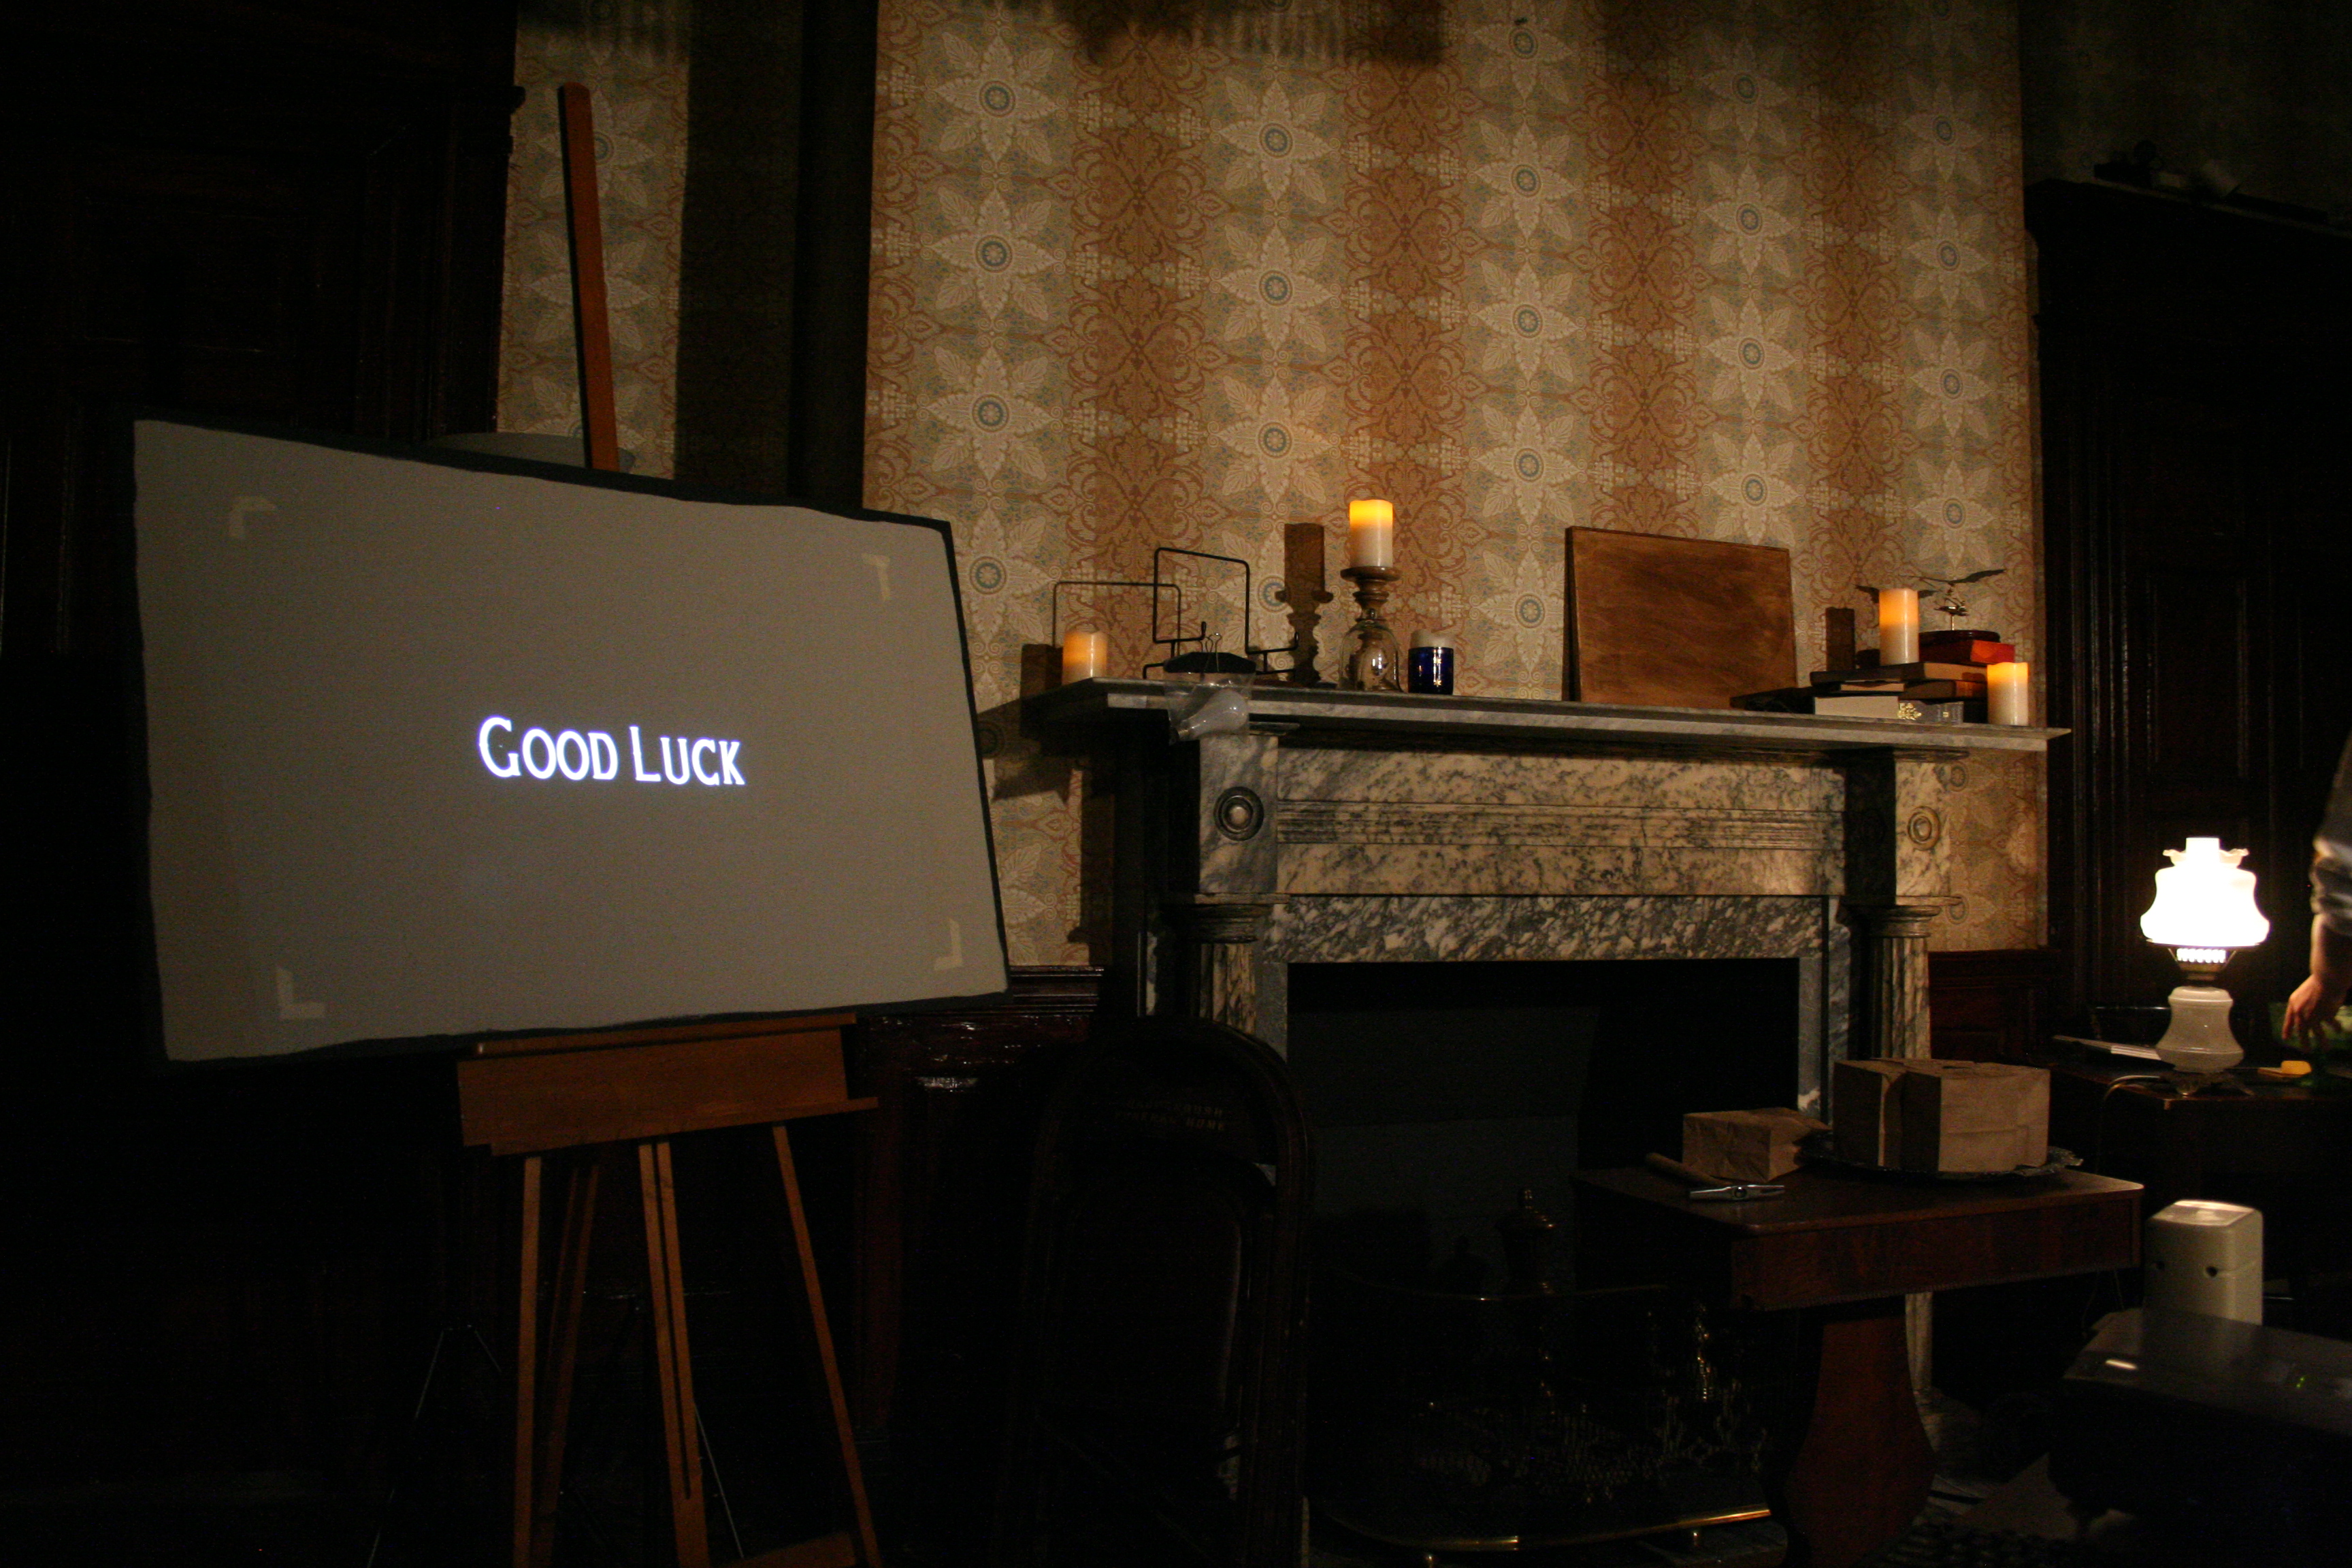 Fireplace with candles, with screen reading "GOOD LUCK"